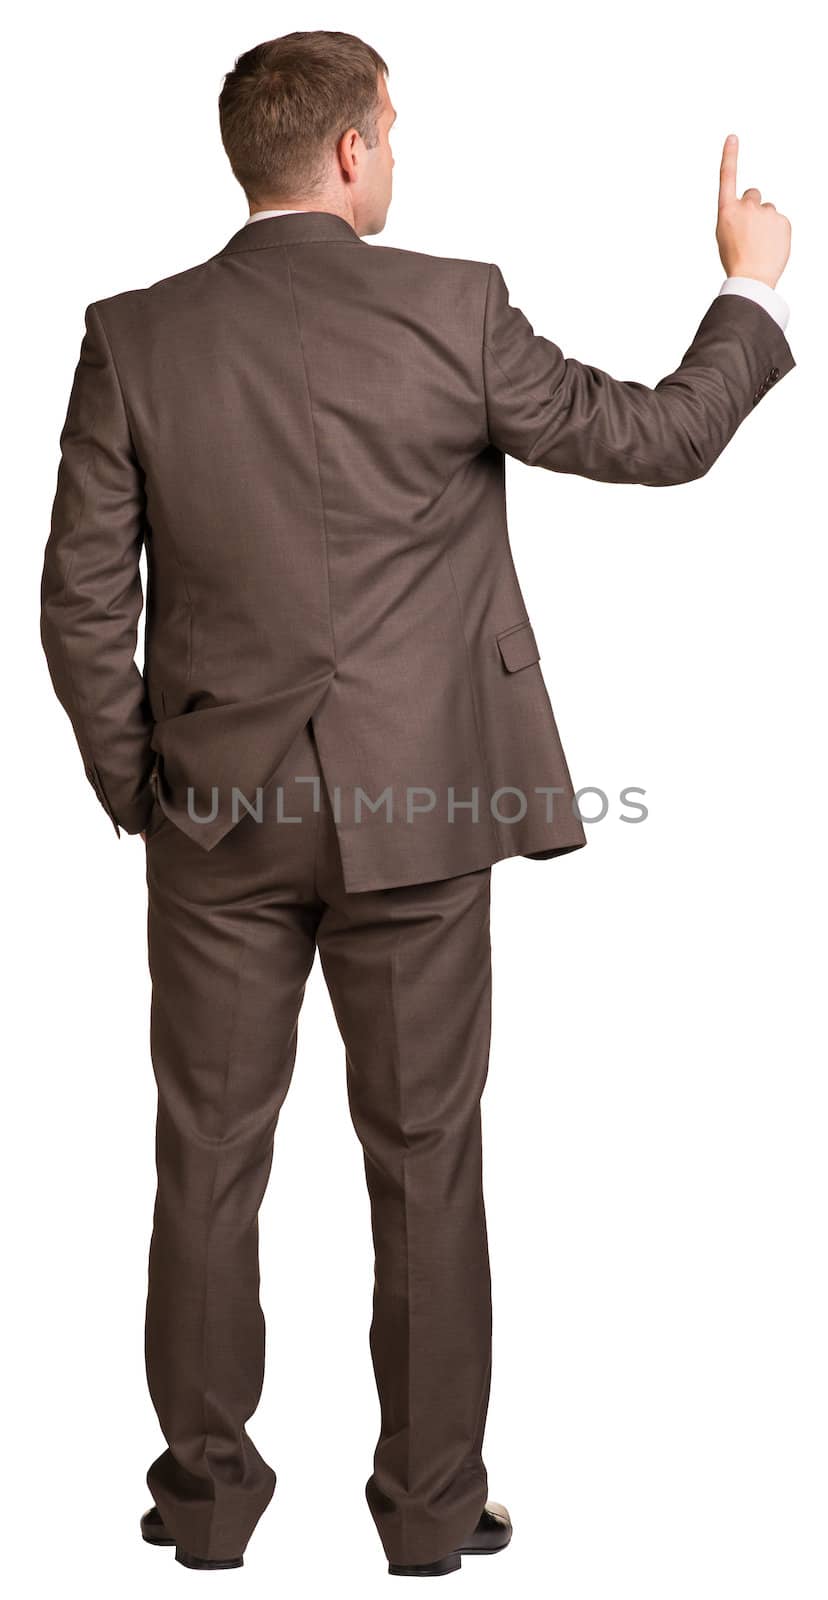 Businessman holding hand up in front of him. Rear view. Isolated on white background.